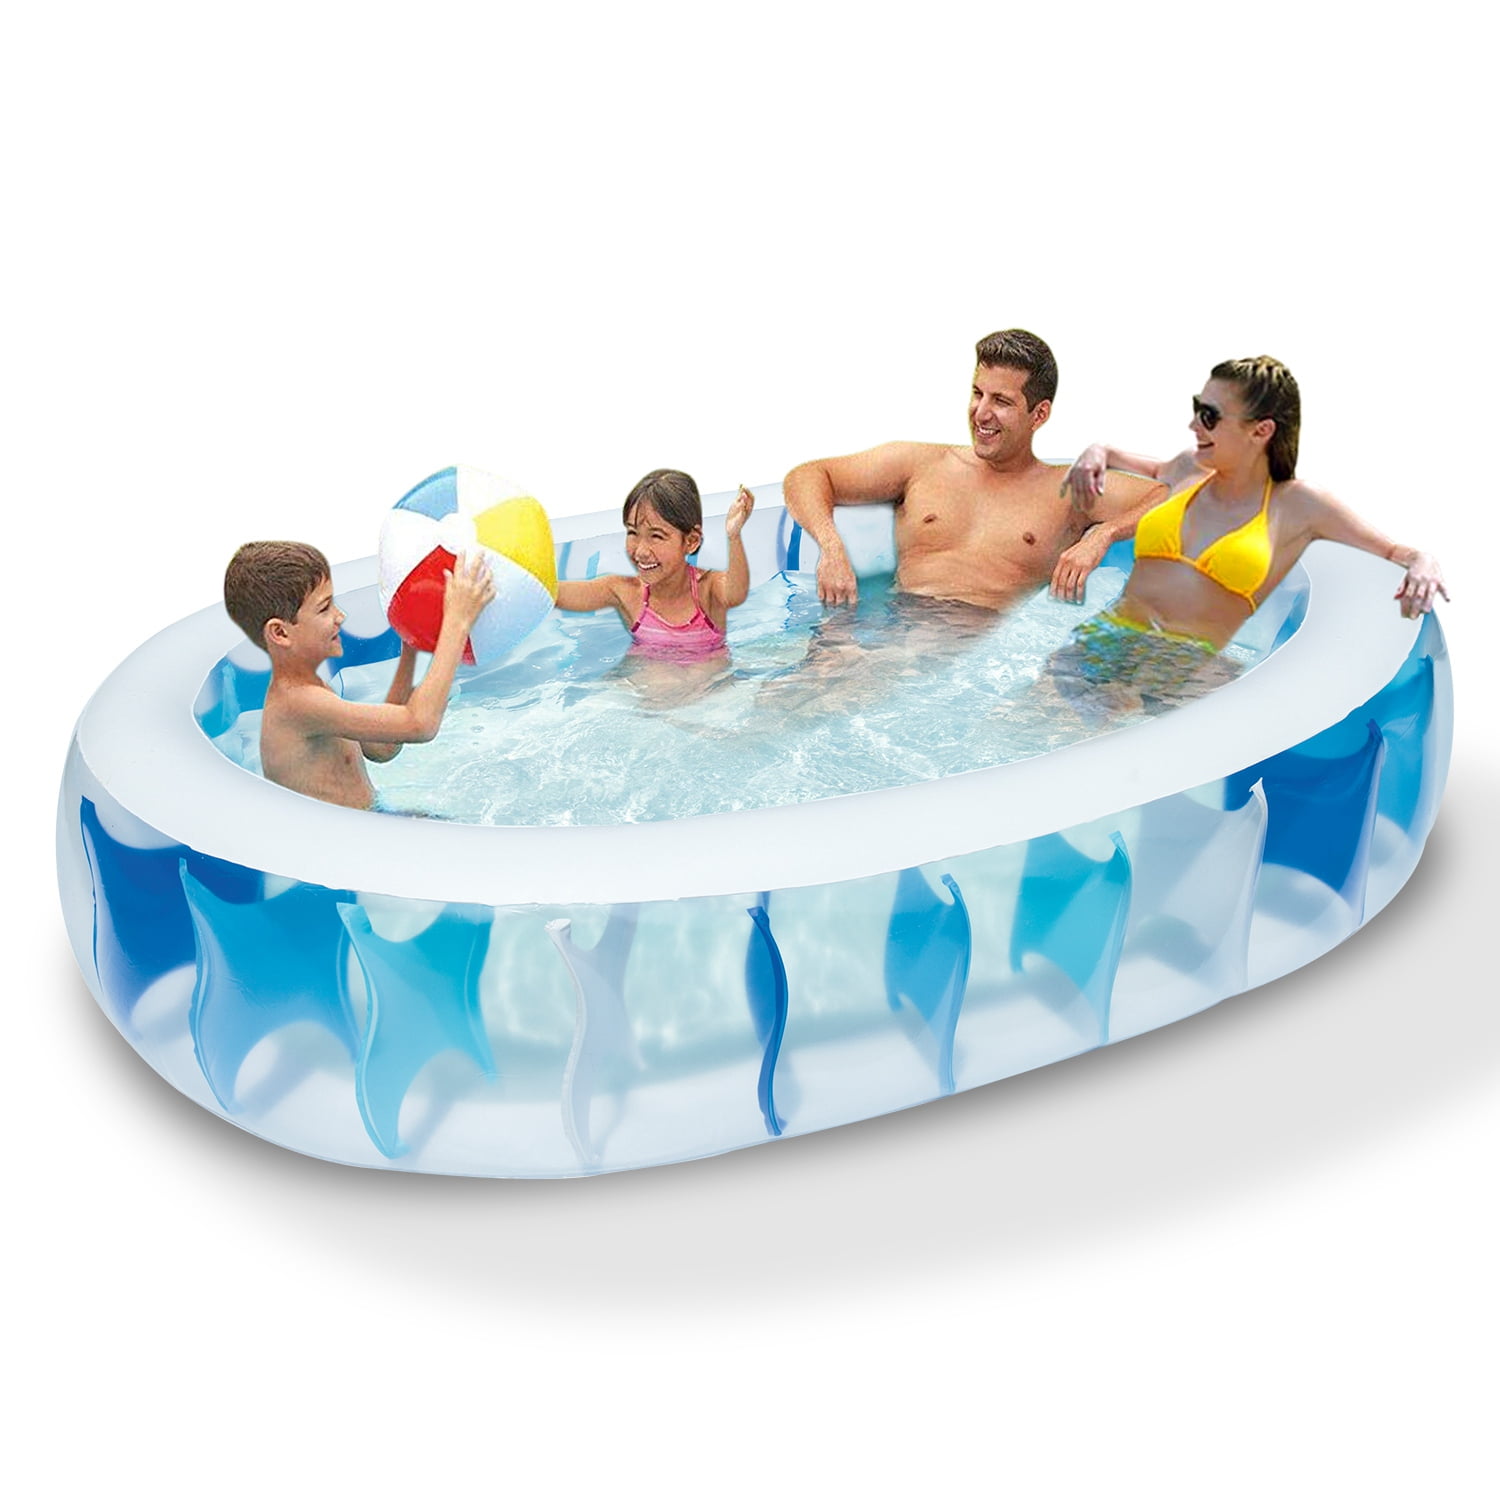 Portable Inflatable Baby Swimming Pool Outdoor Children Balls Pool Summer Beach 